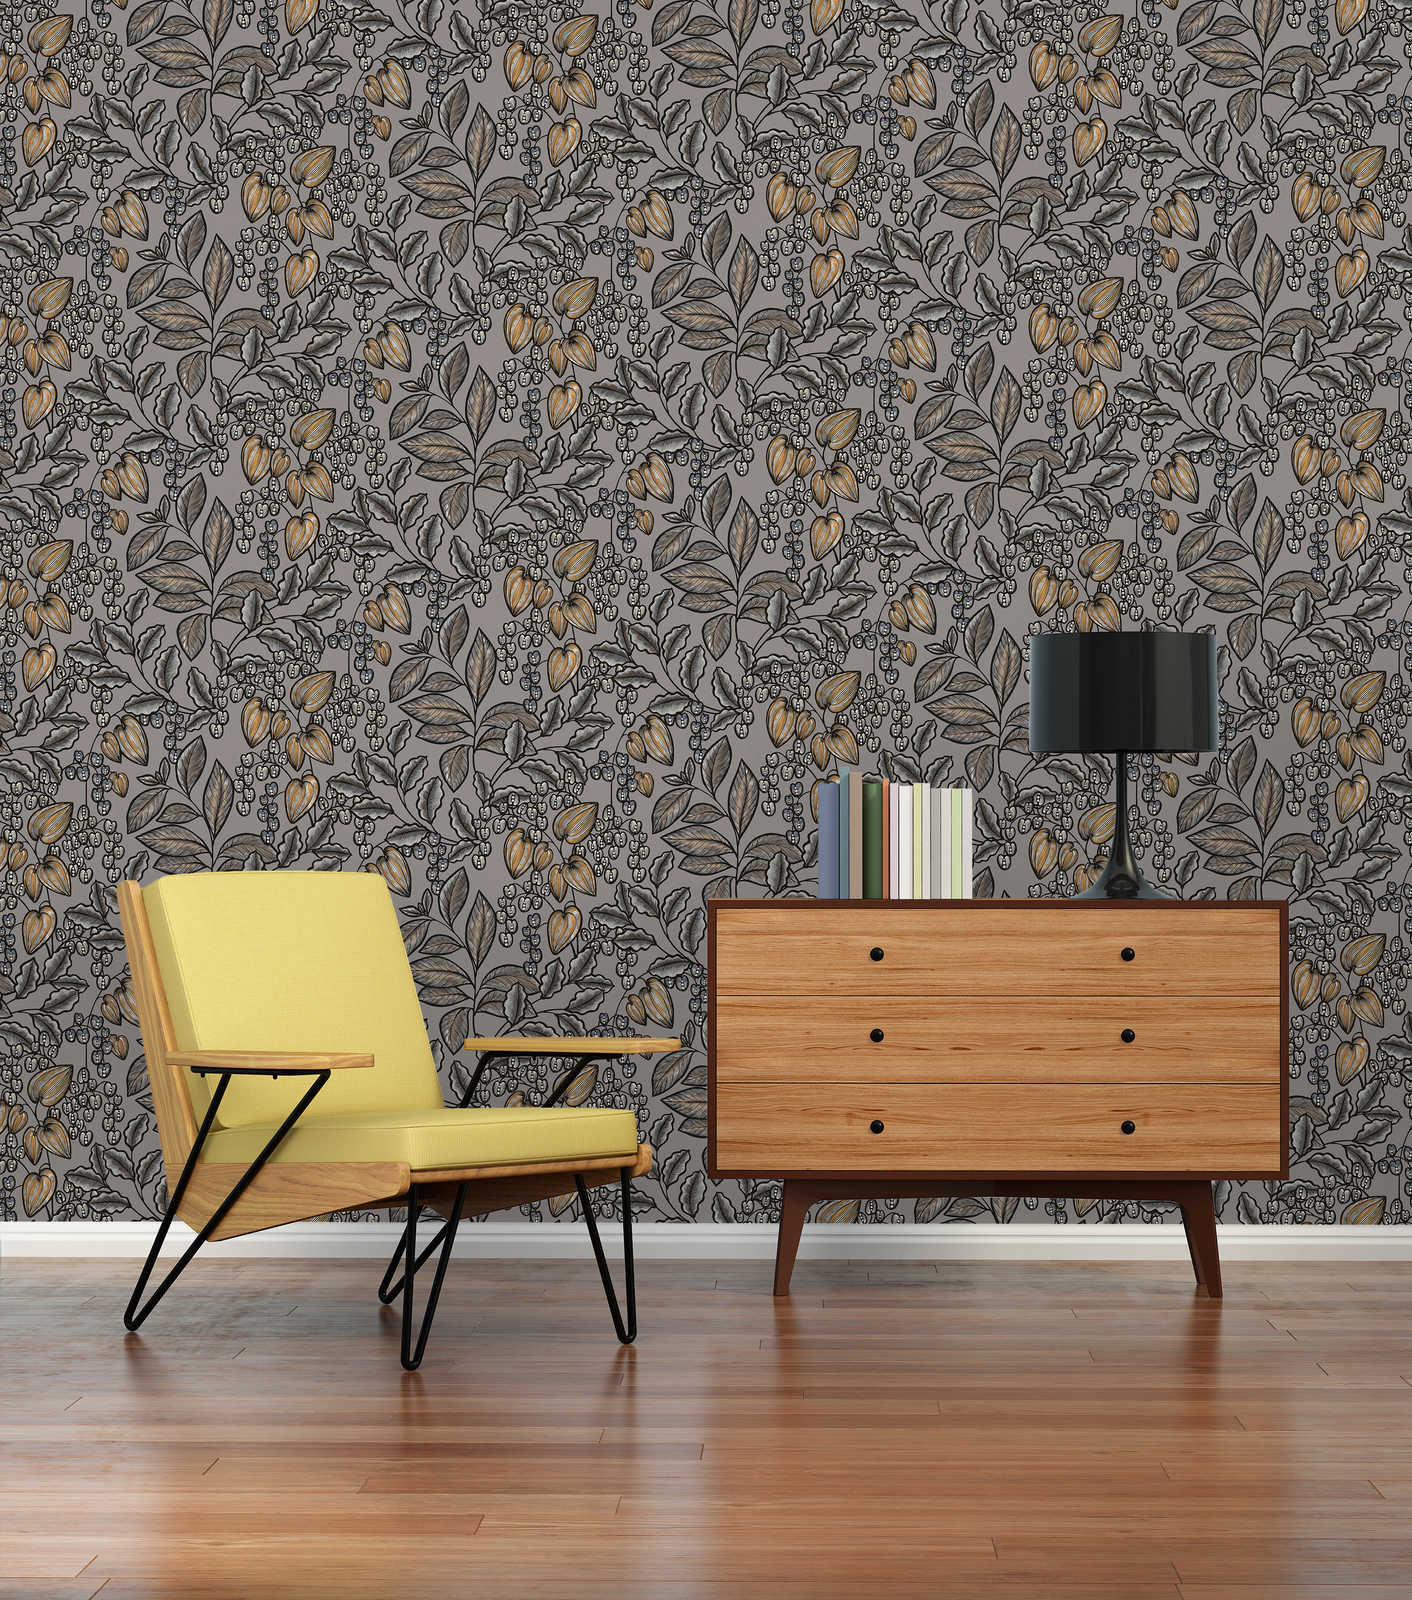             Wallpaper greige leaves design with mustard yellow accents - grey, brown, yellow
        